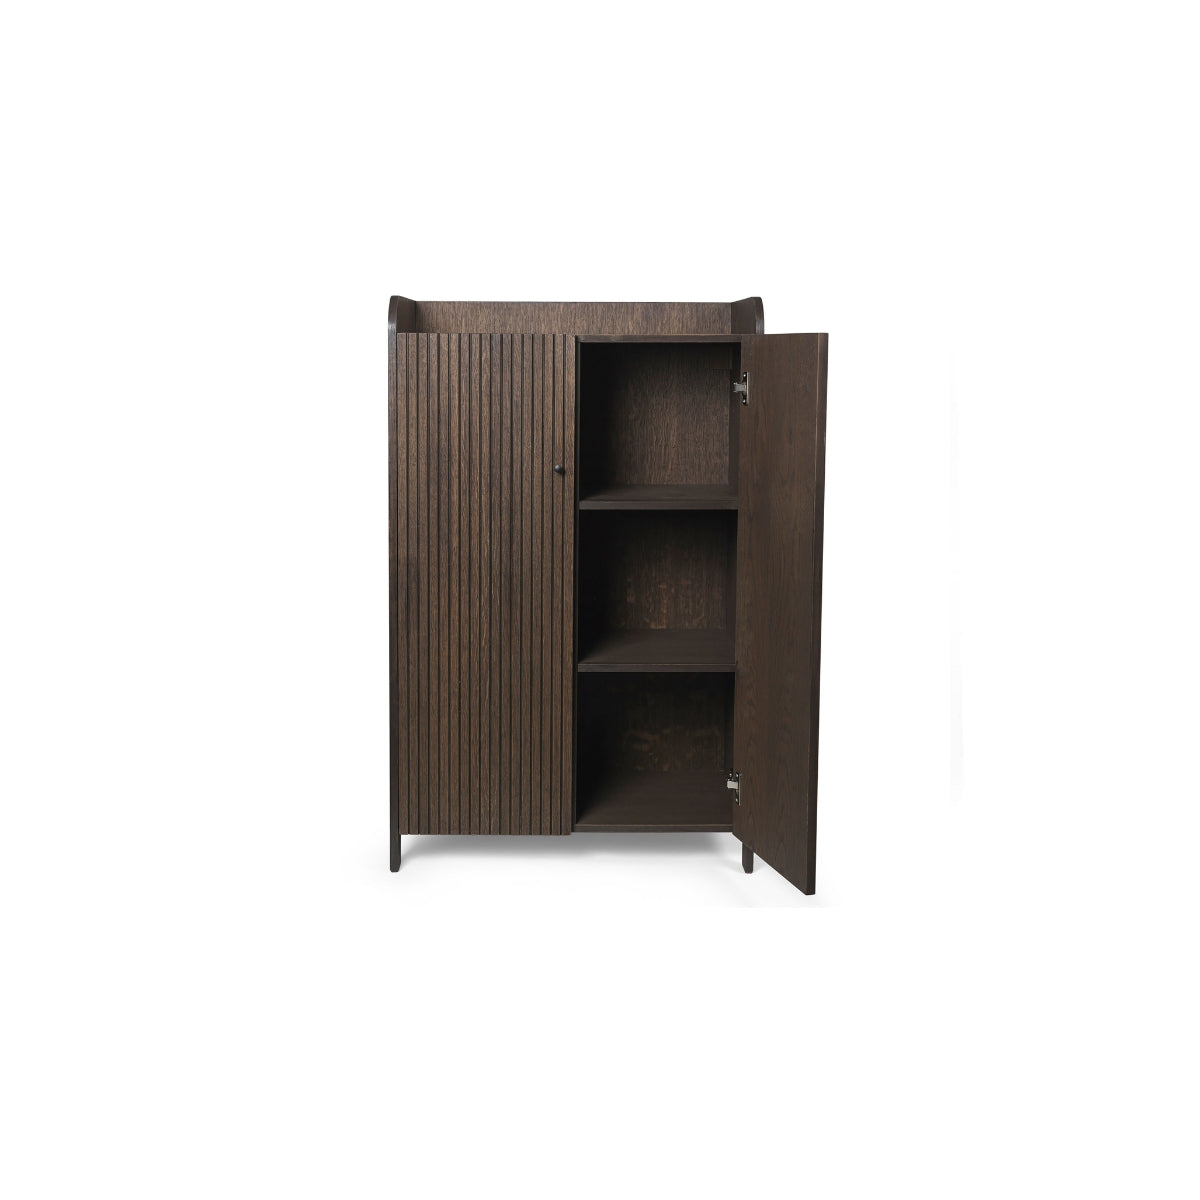 Ferm Living Sill cupboard low. Shop online at someday designs #colour_dark-stained-oak